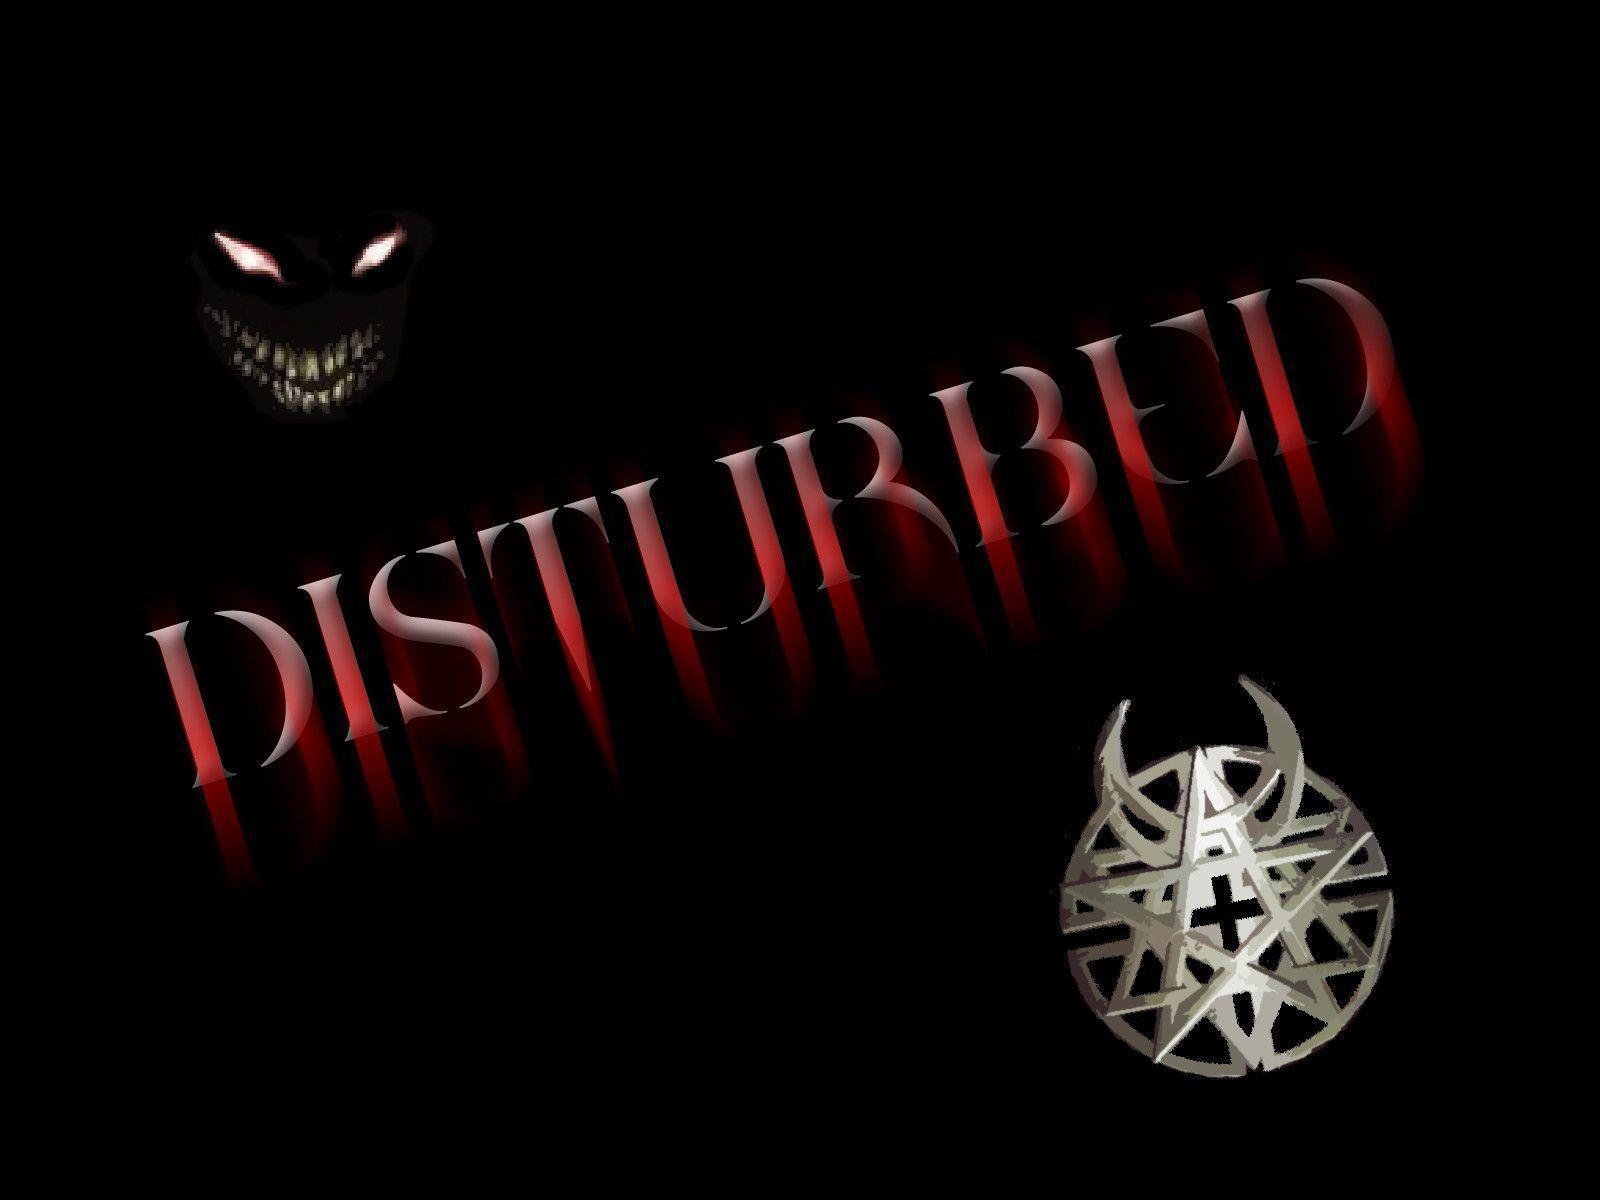 Image For > Disturbed Logo Wallpapers